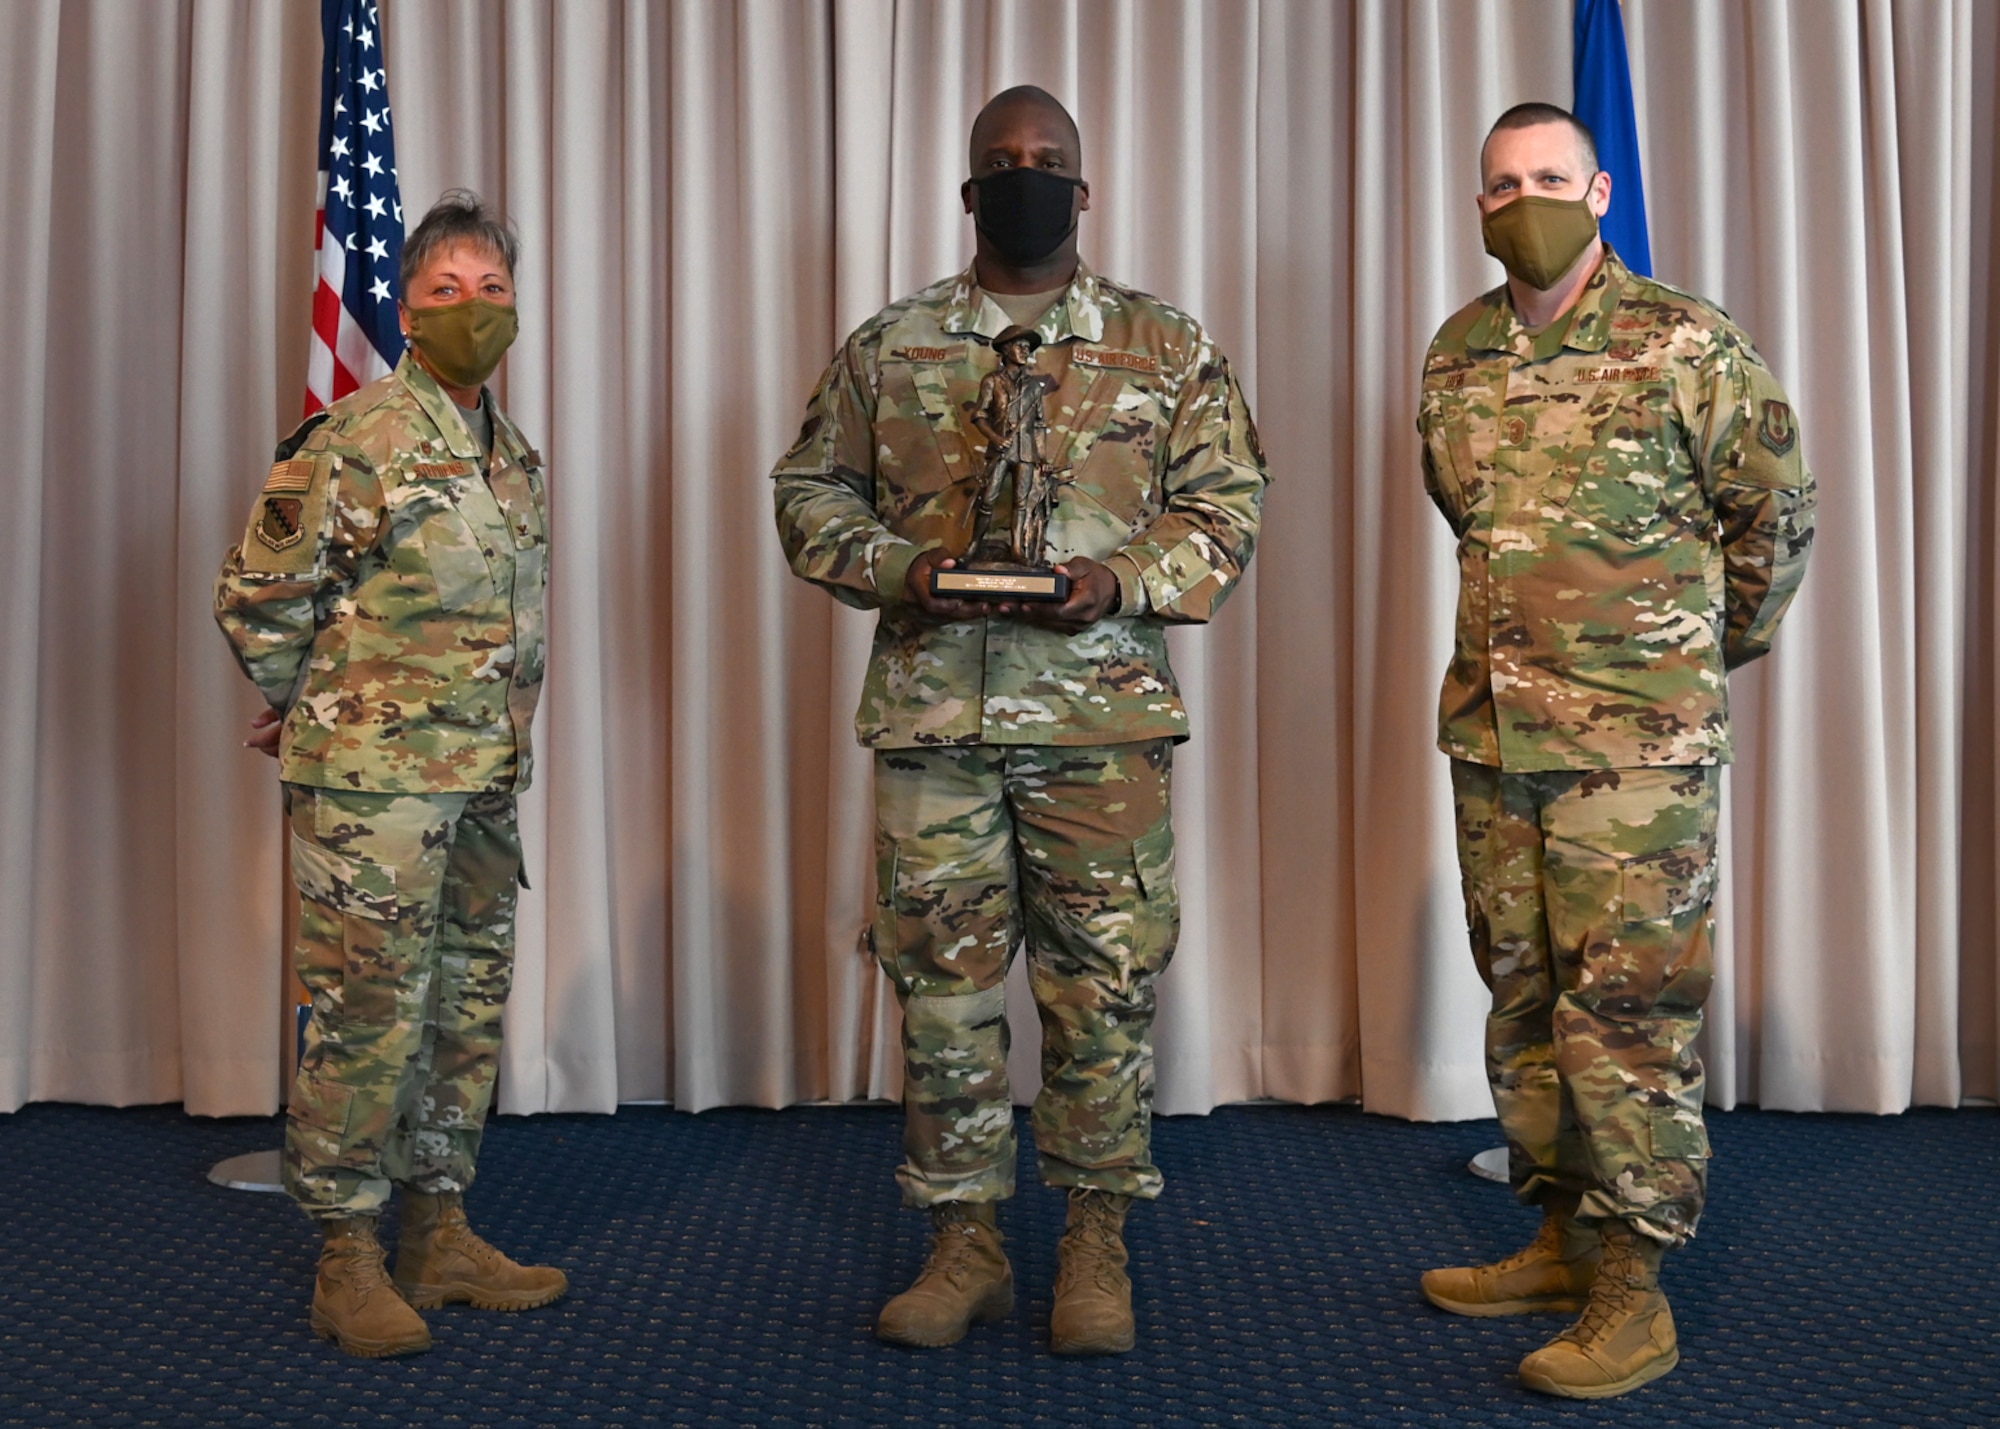 Col. Katrina Stephens, 66th Air Base Group commander, and Chief Master Sgt. Bill Hebb, 66 ABG command chief, present Master Sgt. Ronald Young, 66 ABG Inspector General superintendent, with the 2020 Senior Noncommissioned Officer of the Year award at Hanscom Air Force Base, Mass., Jan 20.